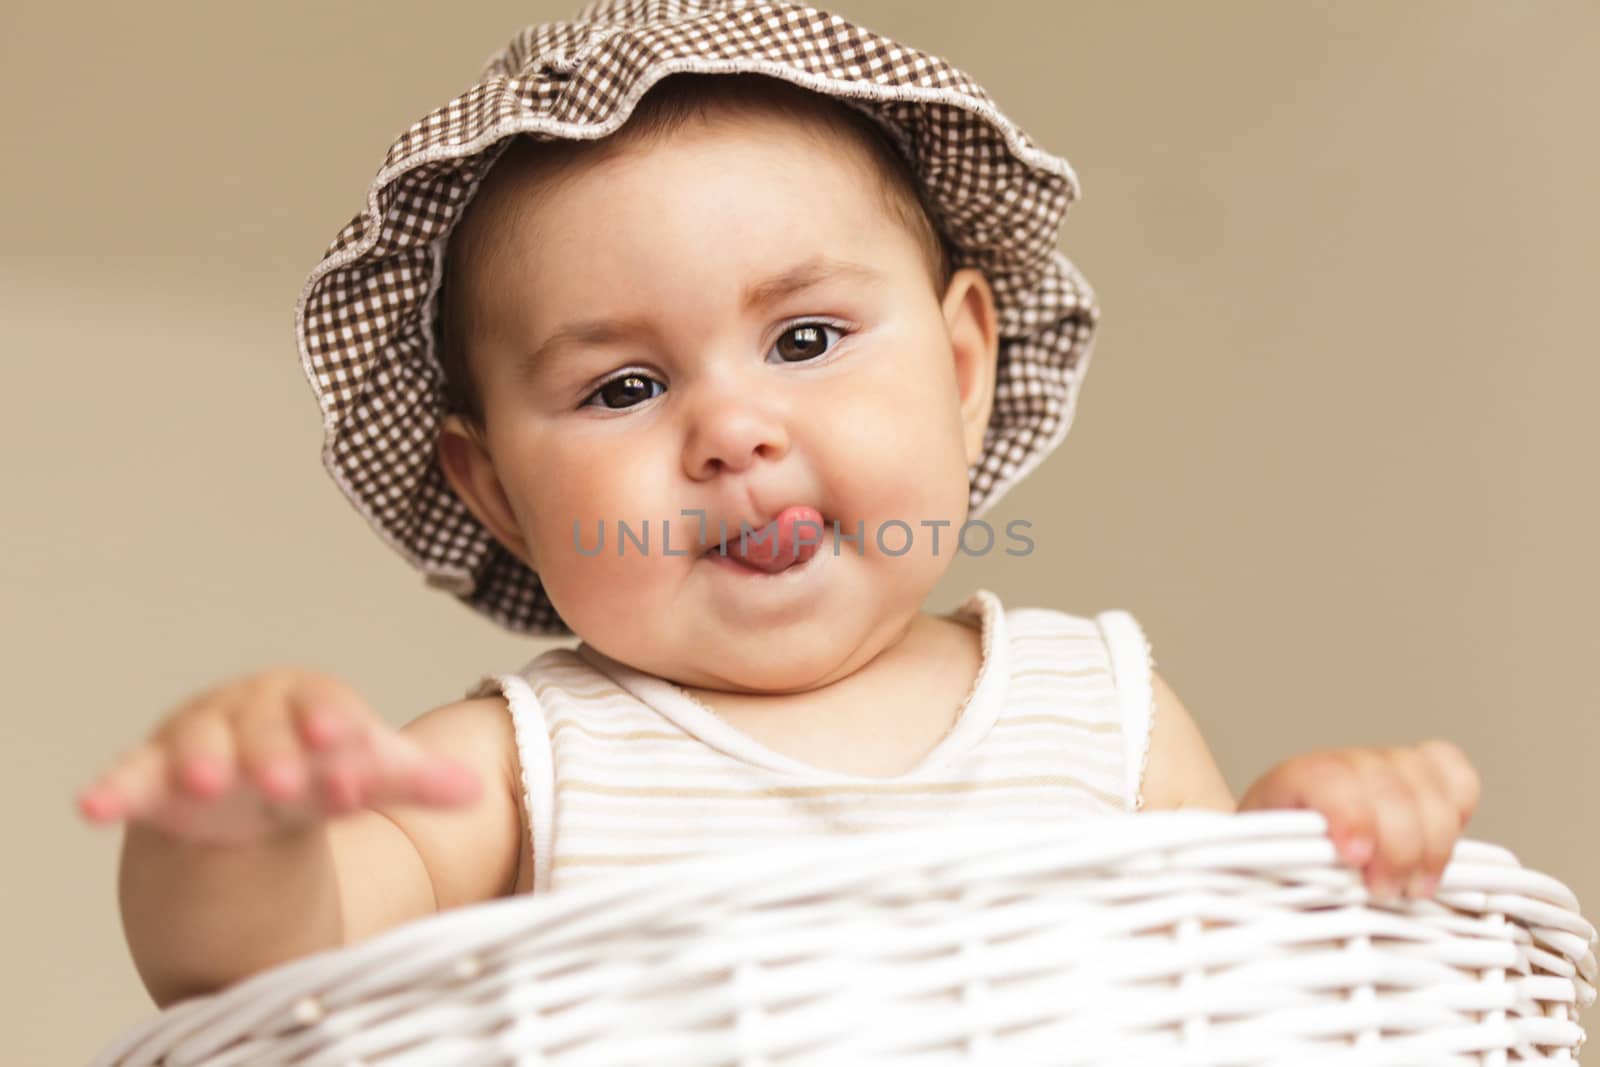 Eight month baby in basket by oksix